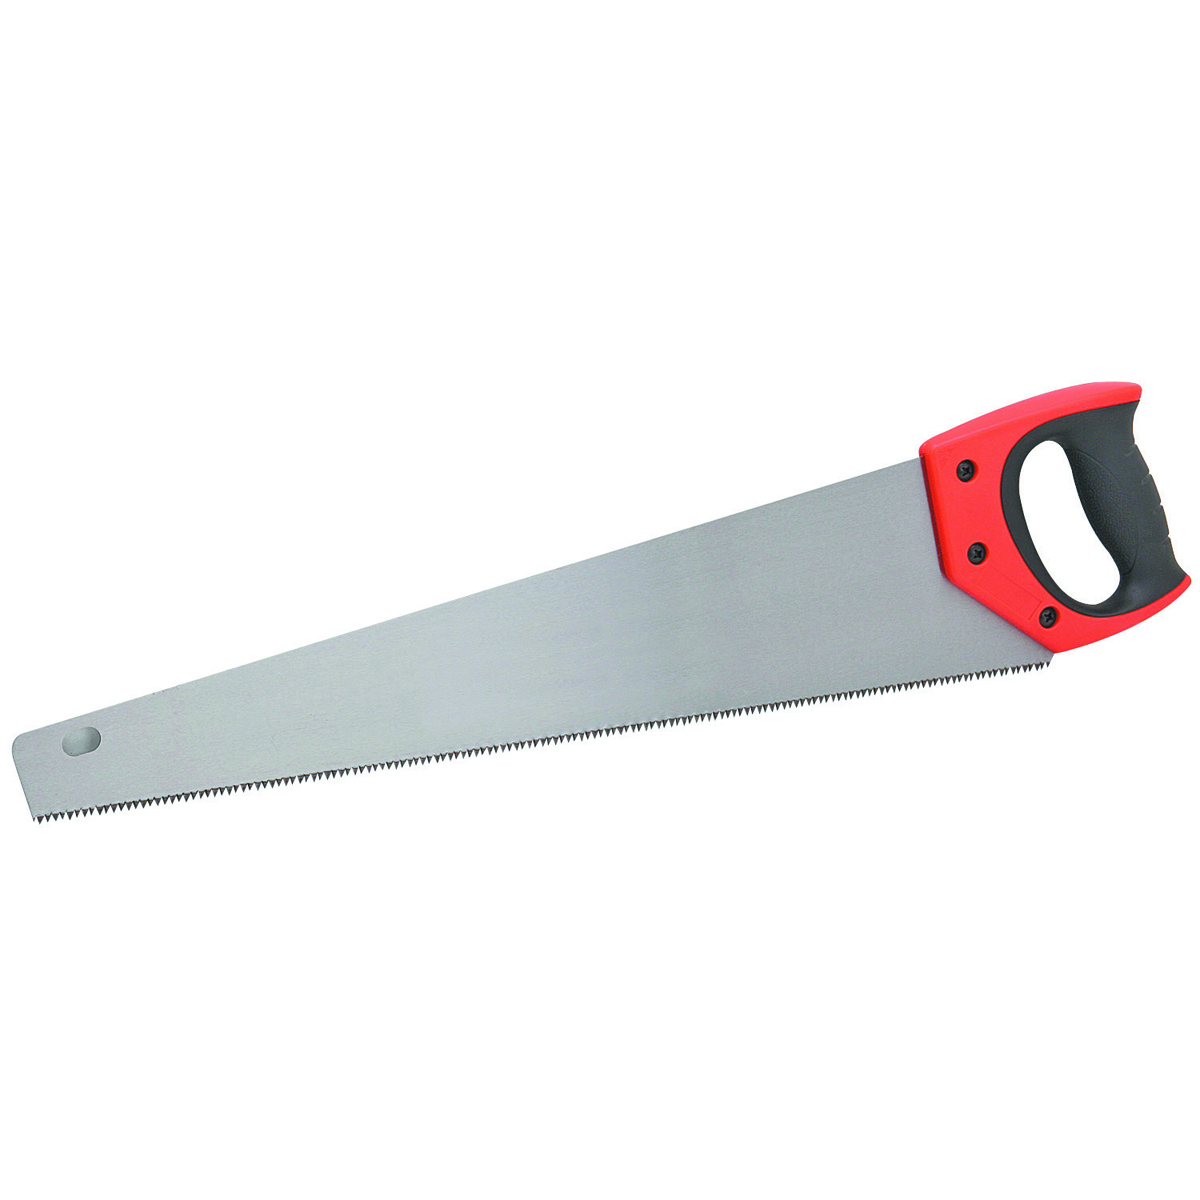 PORTLAND 22 In. Hand Saw with TPR Handle – Item 65484 – Harbor Freight